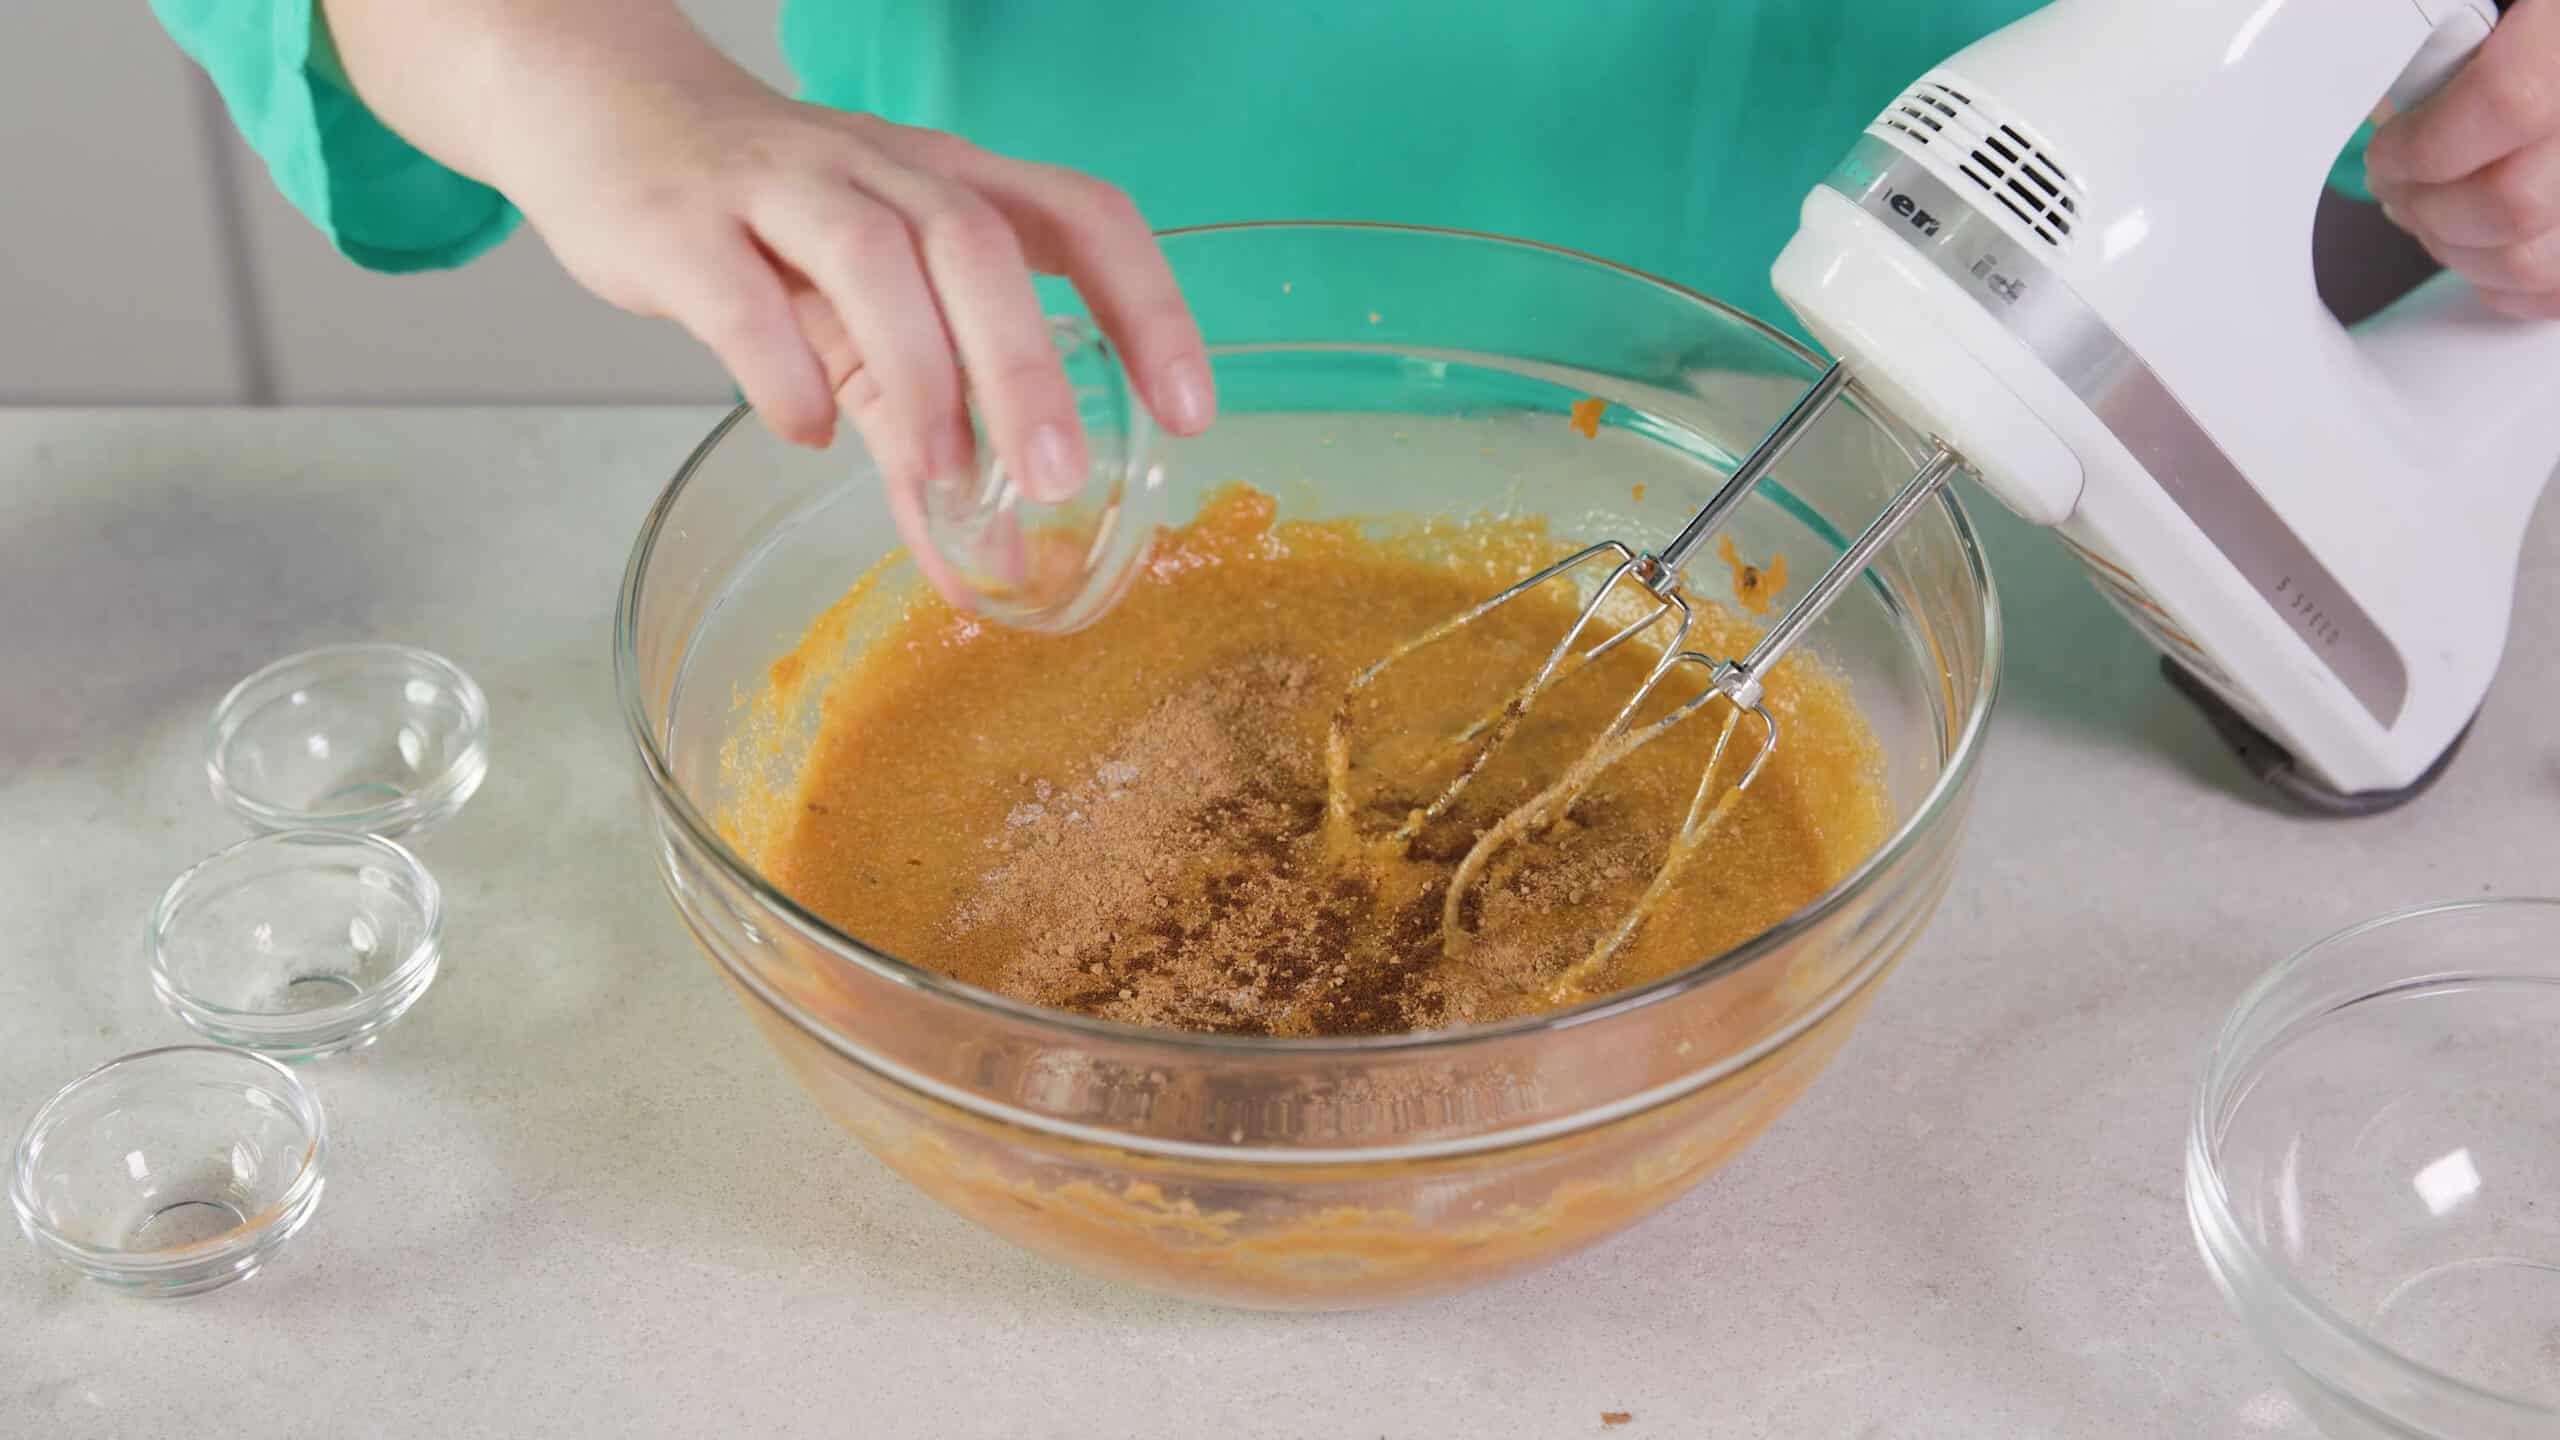 Angled view of large clear glass mixing bowl filled with mashed and mixed sweet potatoes and other spice ingredients with a hand mixer at the ready.